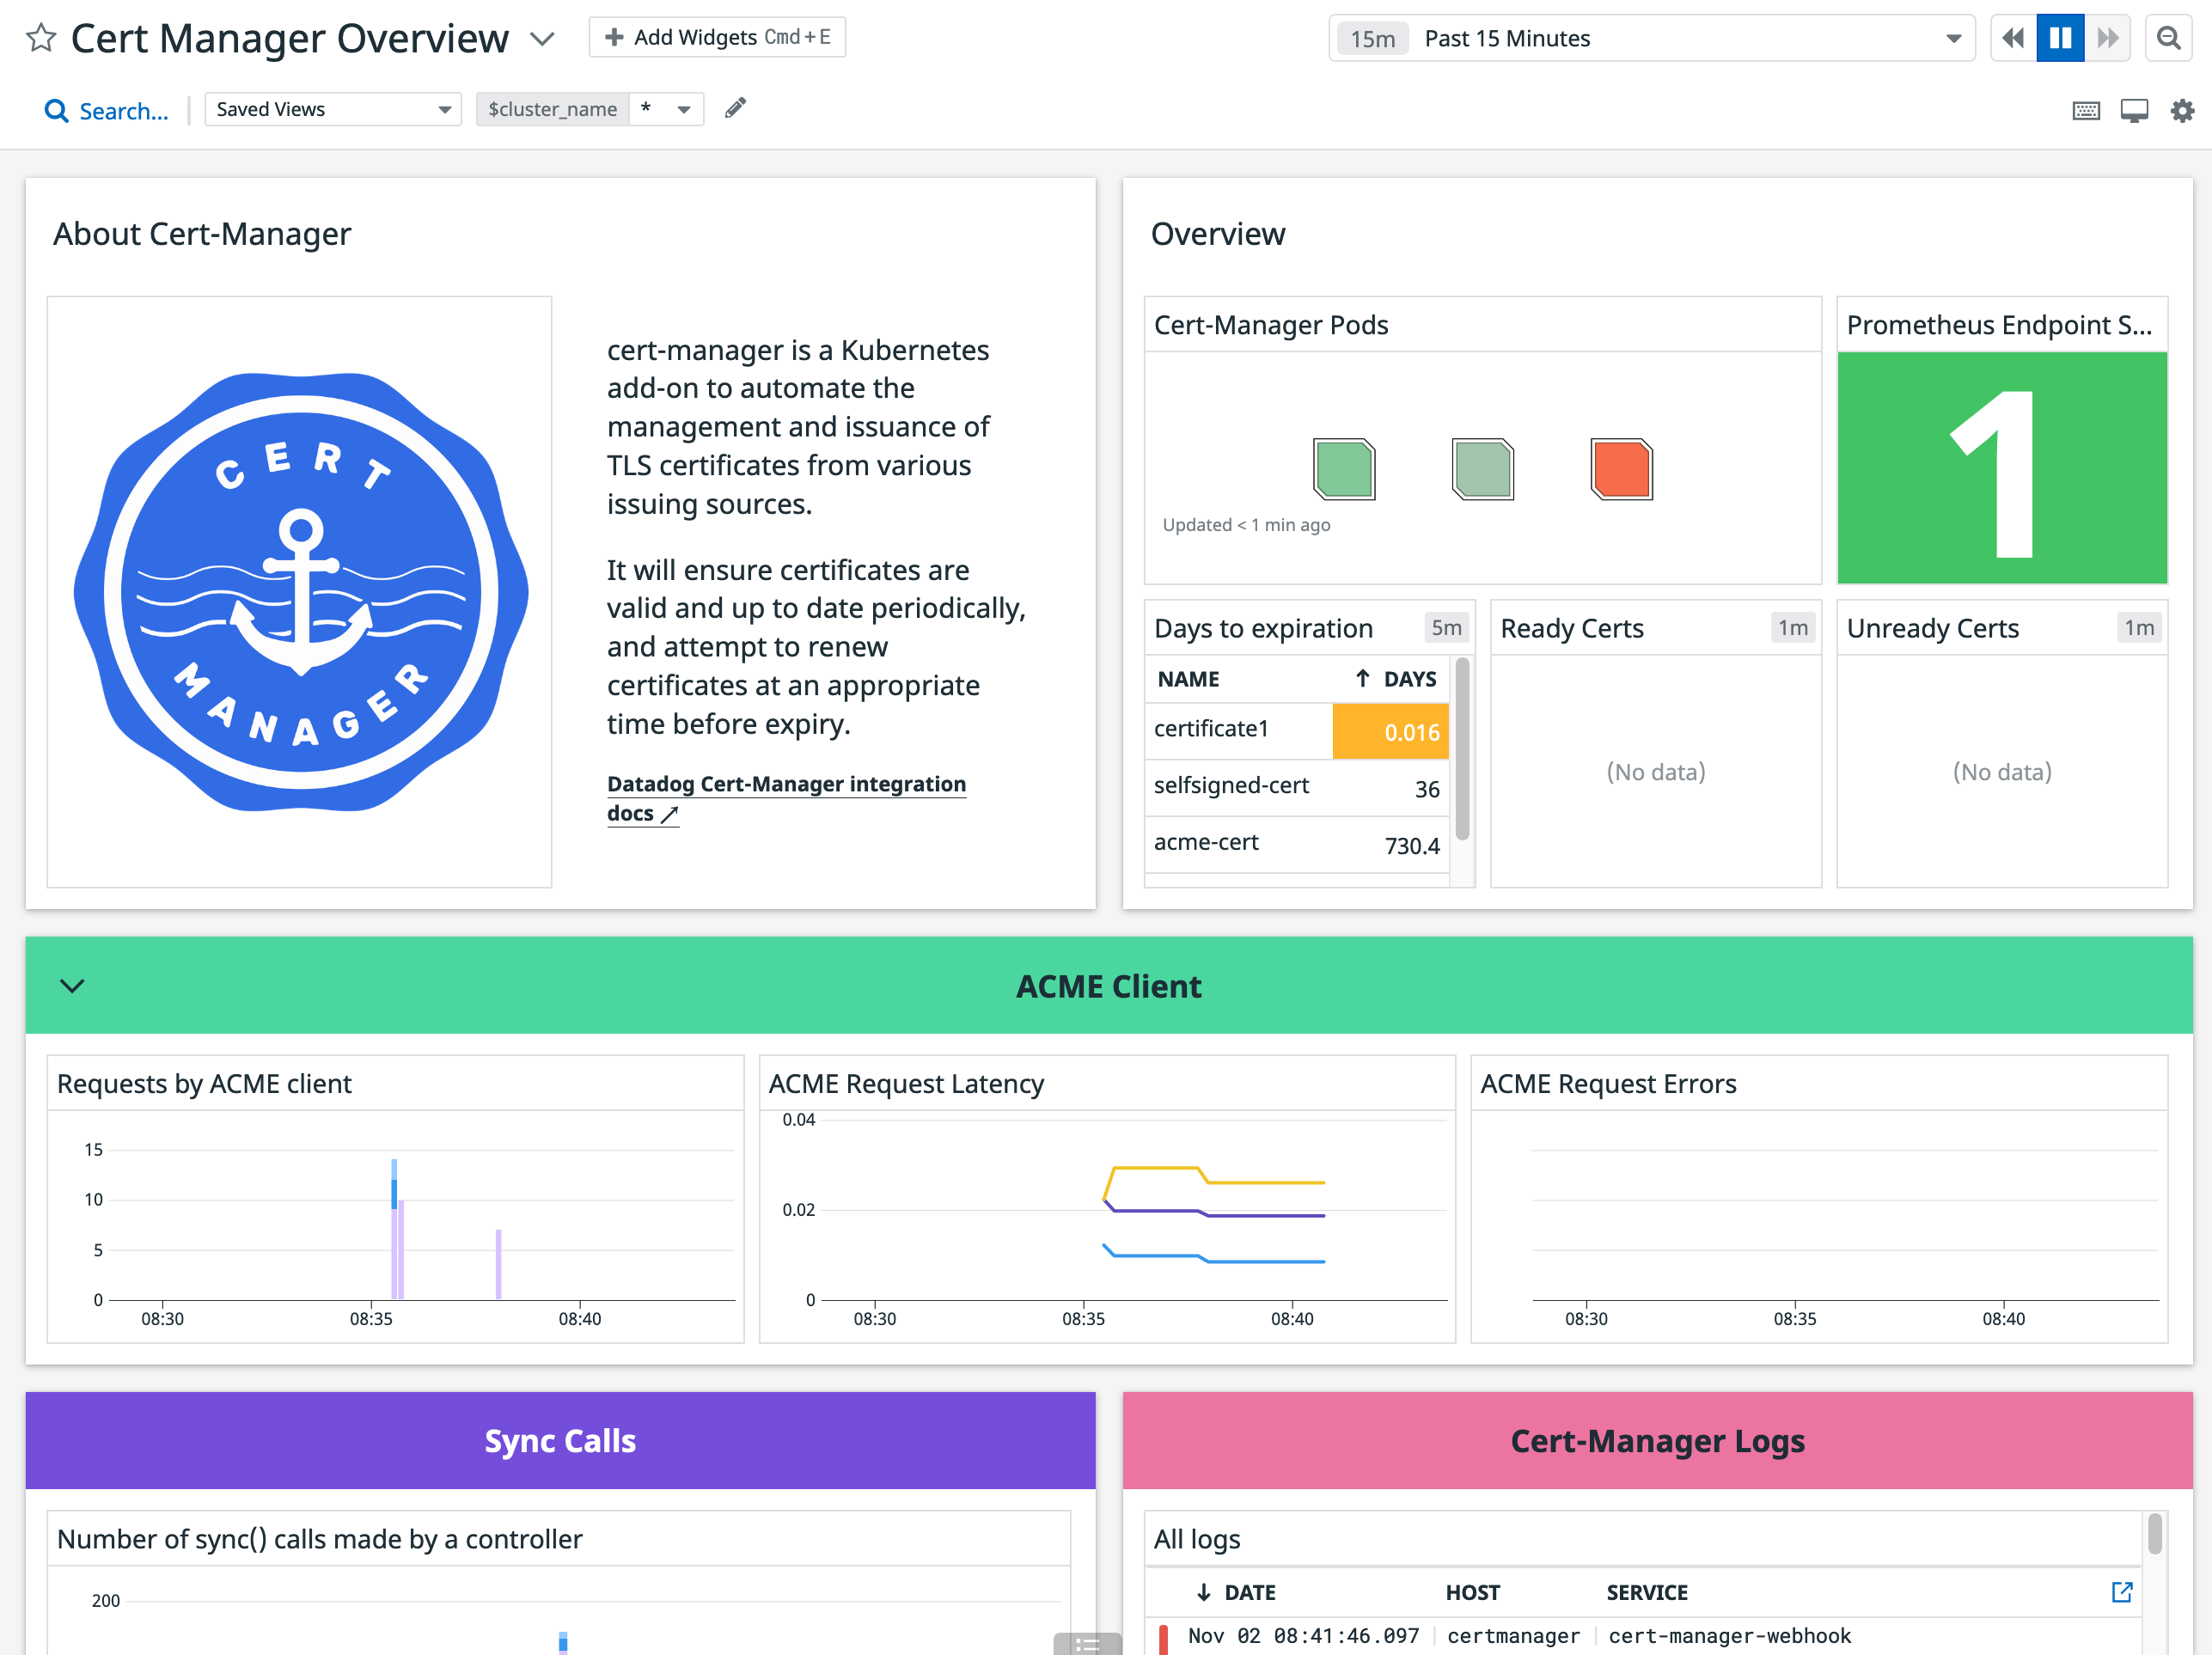 Cert-Manager Overview Dashboard